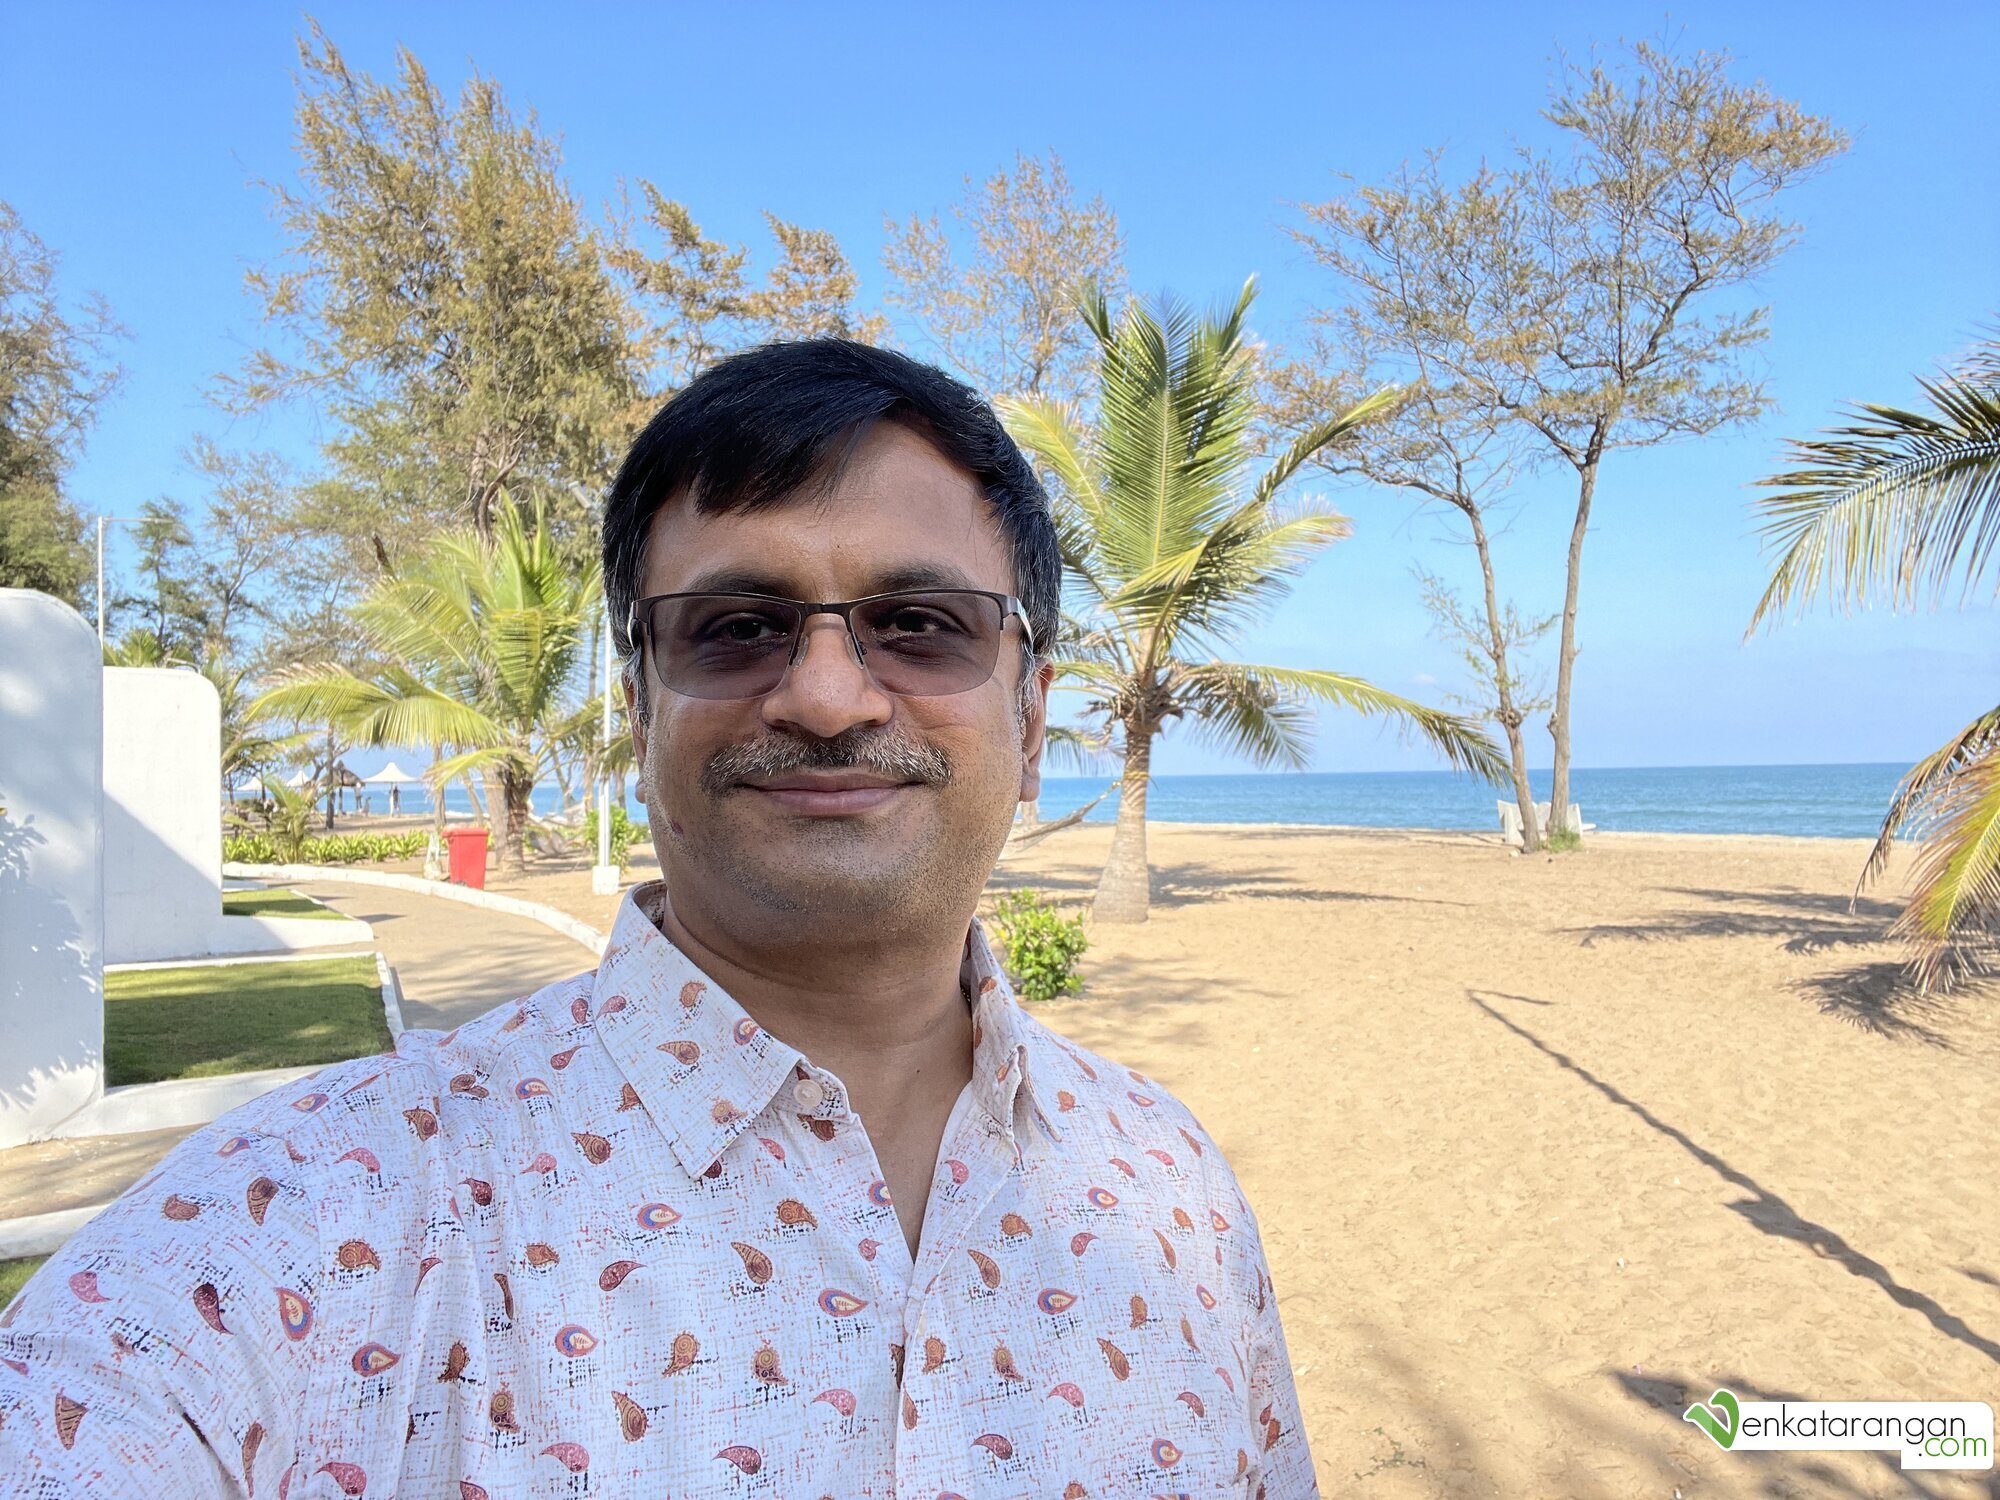 Venkatarangan Thirumalai on a bright evening in front of the cottage on the beach, Bay of Bengal